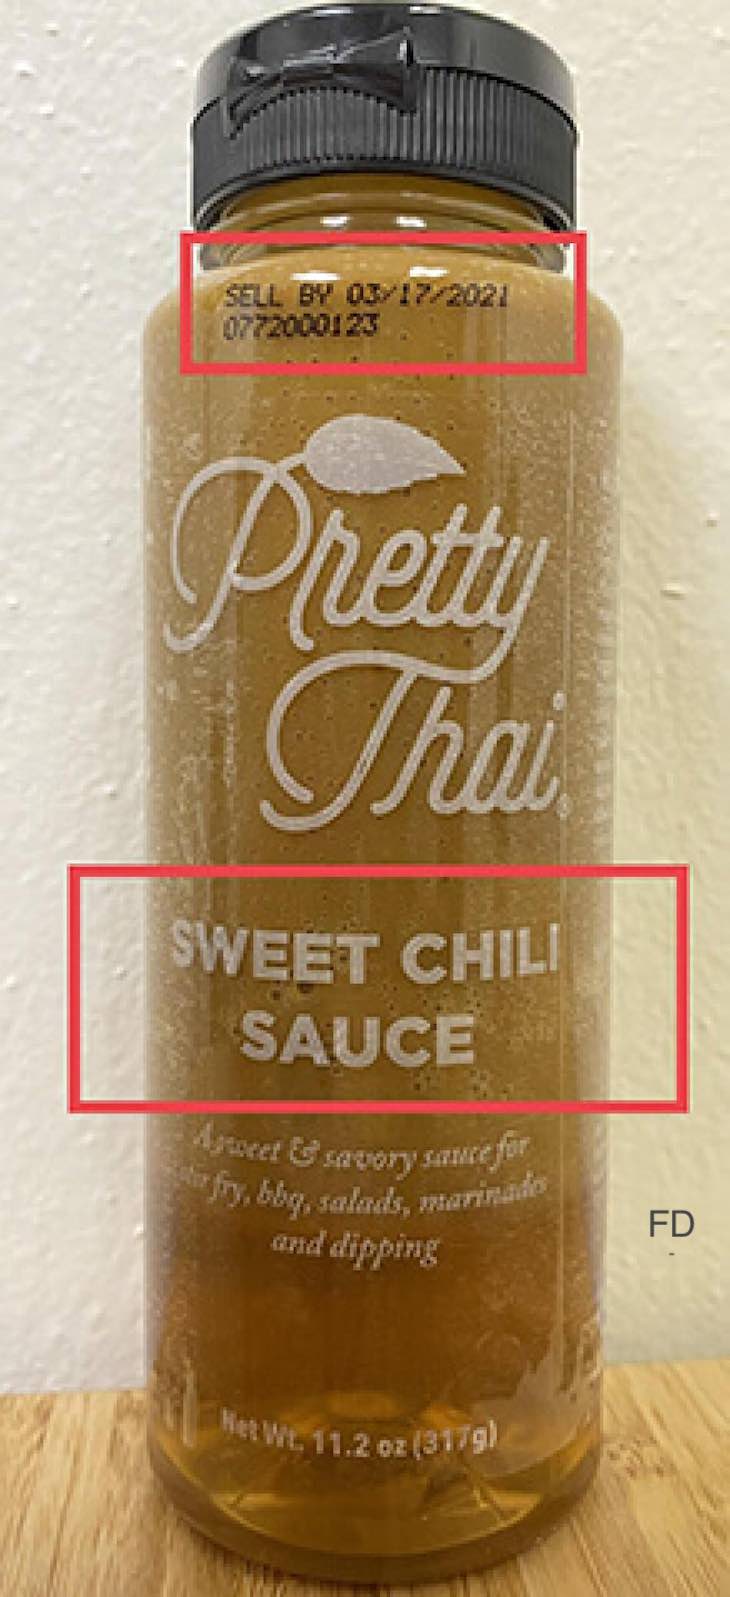 Pretty Thai Sweet Chili Sauce Recalled For Undeclared Peanuts